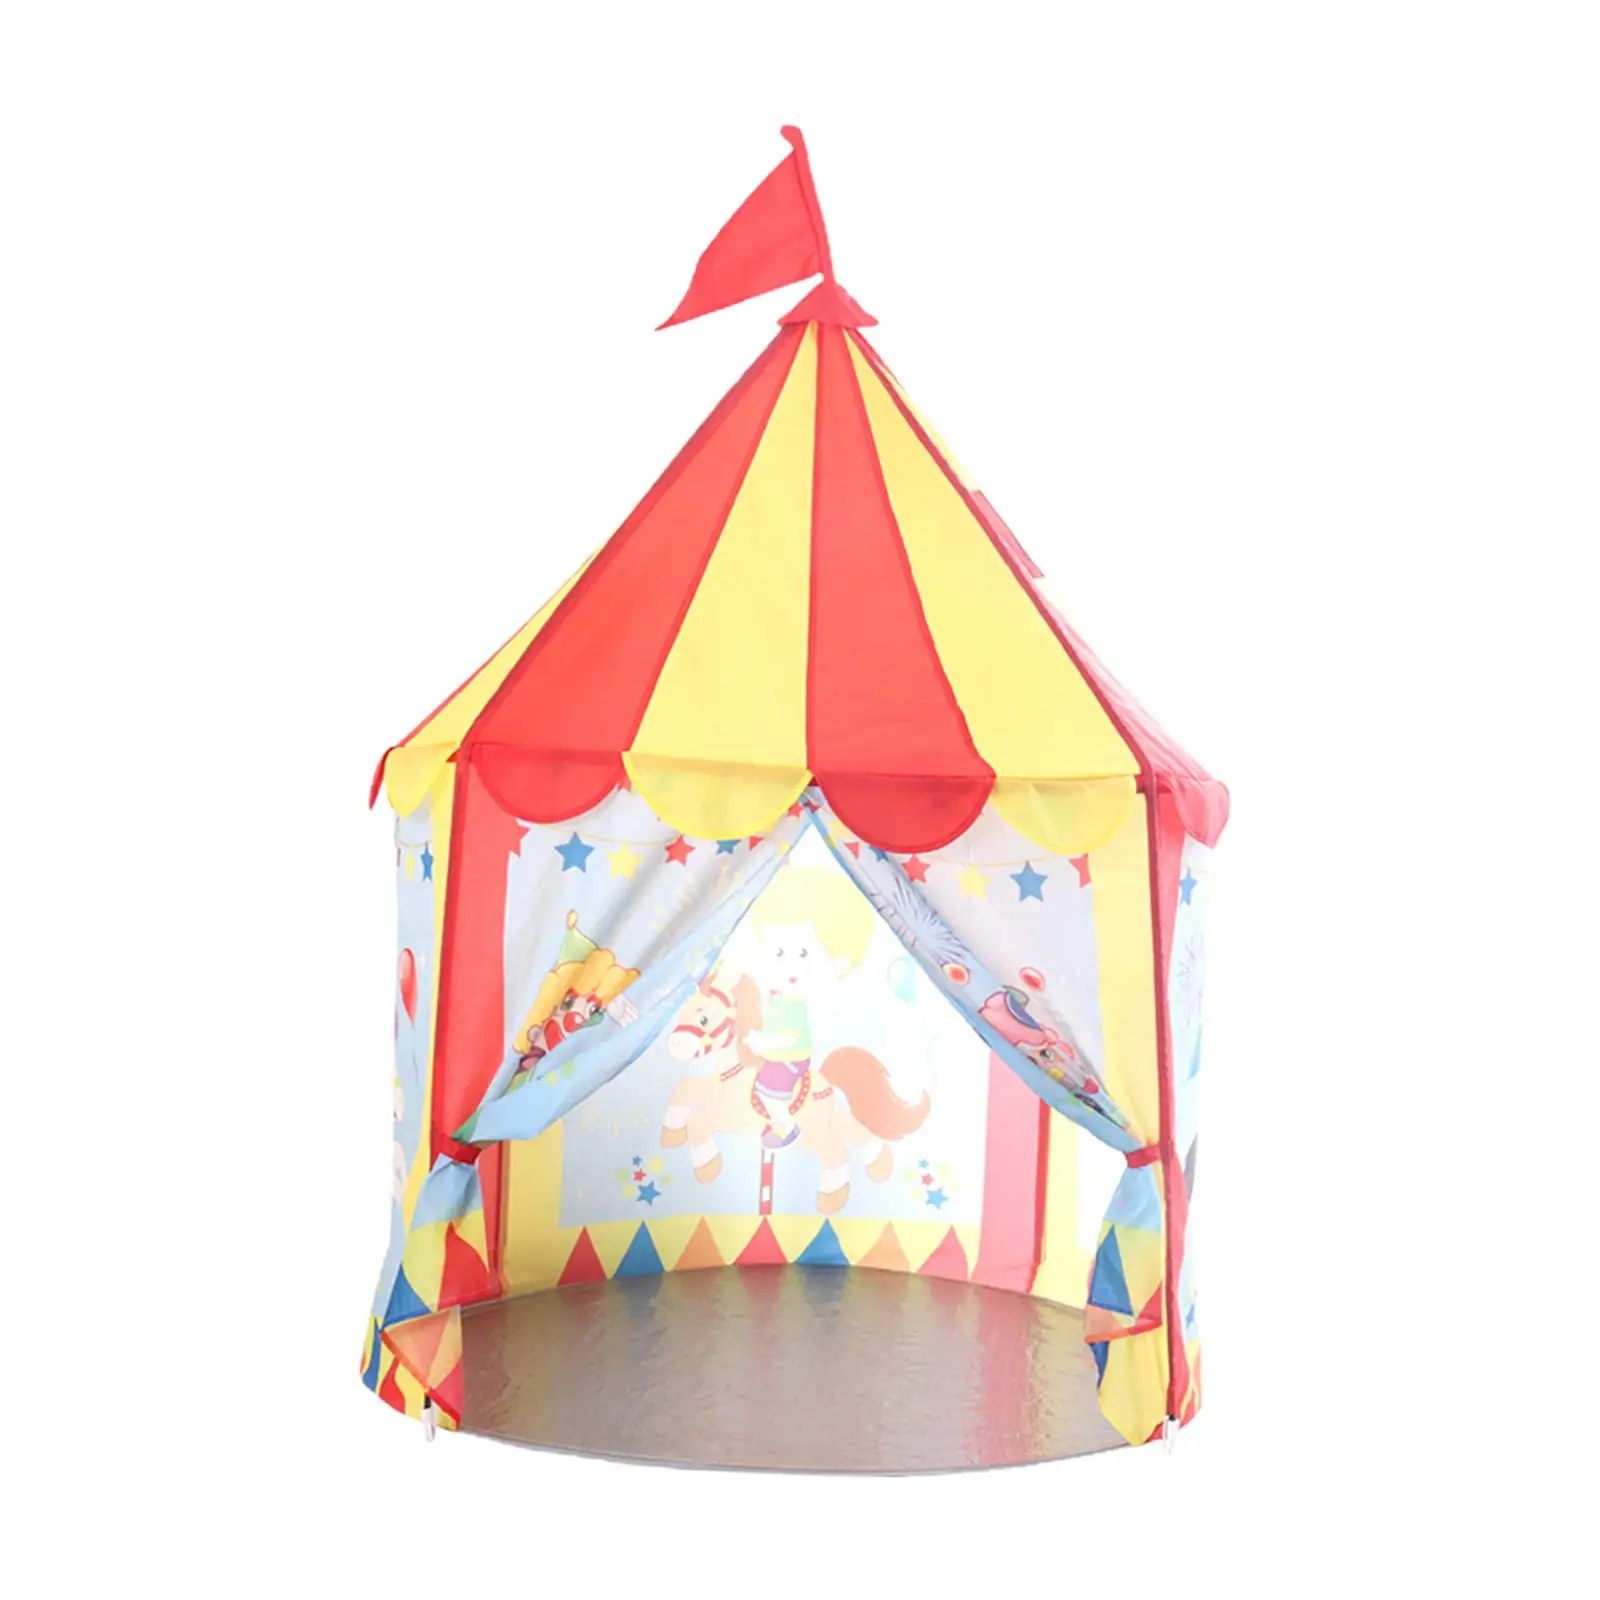 Play Tent House Best Gift Indoor Outdoor Use Play Teepee Princess Castle Playhouse Tent for garden Camping Yard Kids